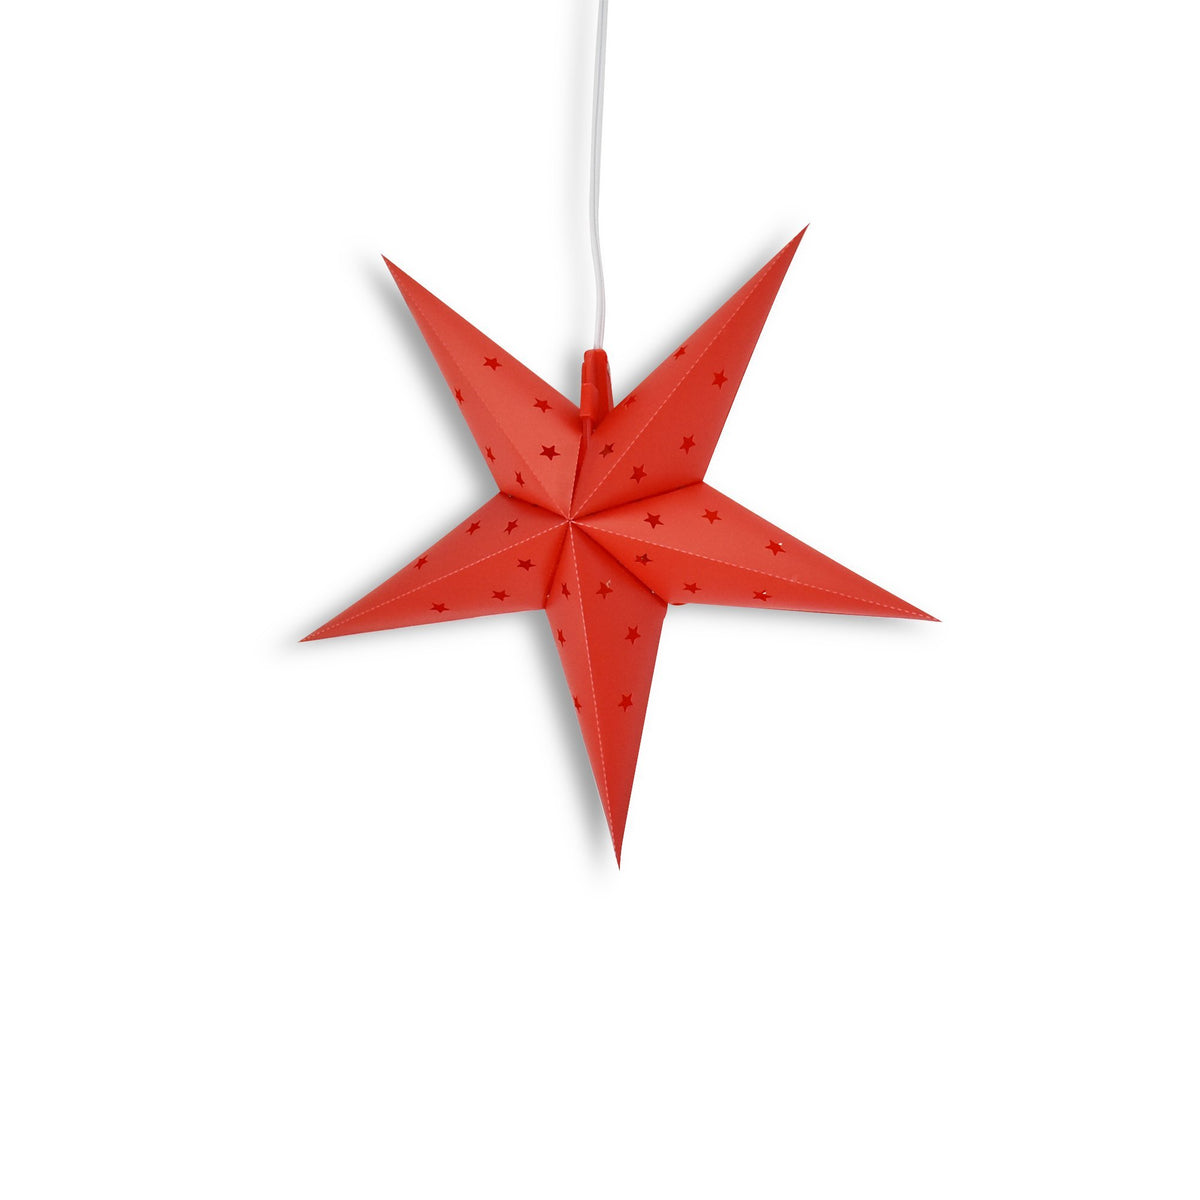 15&quot; Red Weatherproof Star Lantern Lamp, Hanging Decoration (Shade Only)